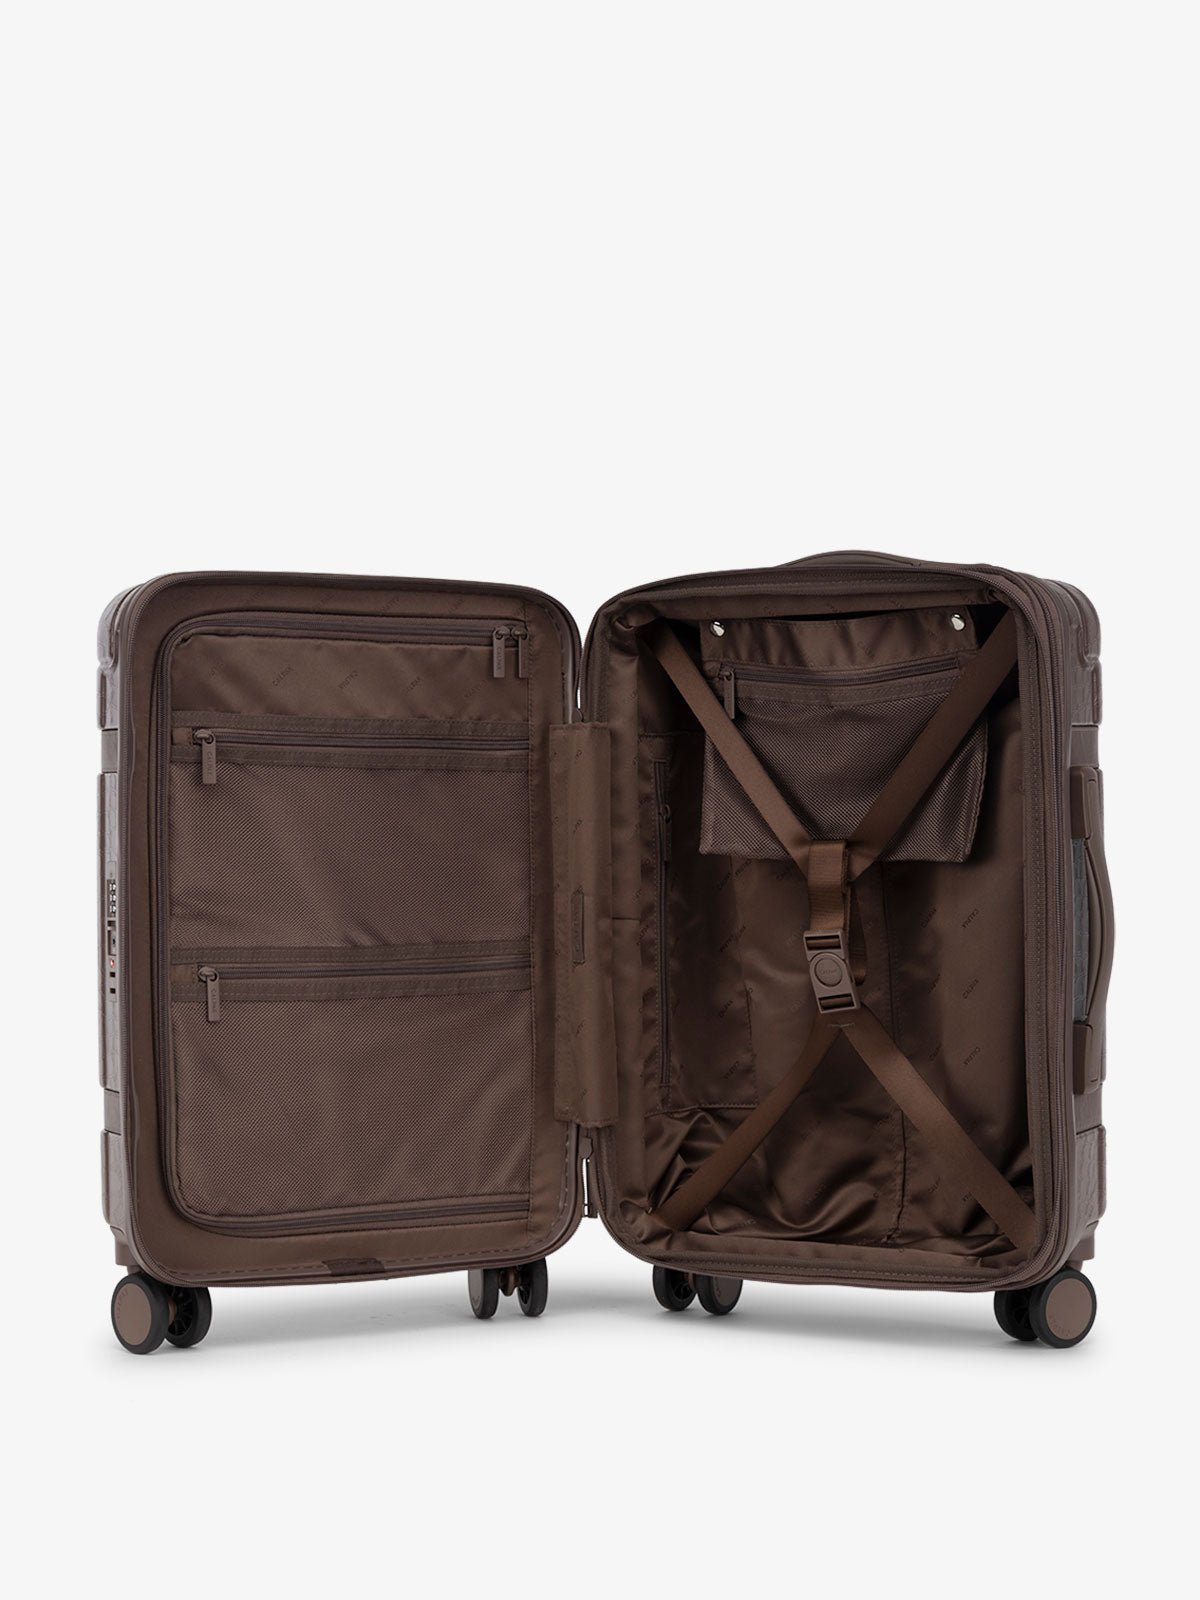 CALPAK TRNK luggage with multiple interior pockets and compression strap for travel in brown